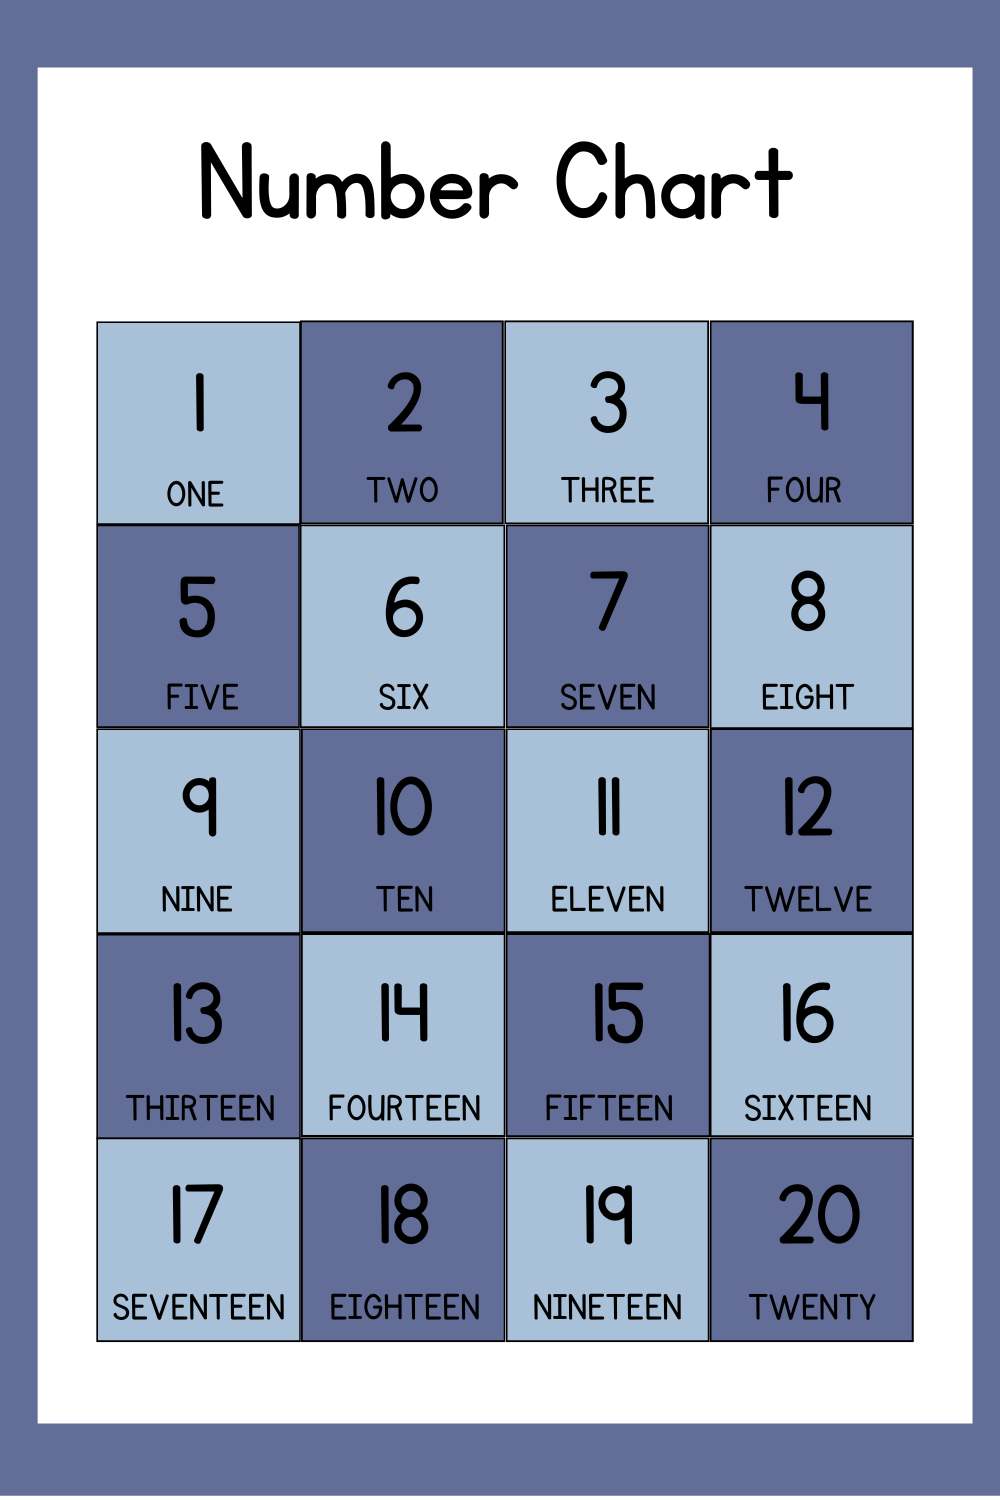 Printable number chart for numbers 1-20 with numbers and spelling for each number